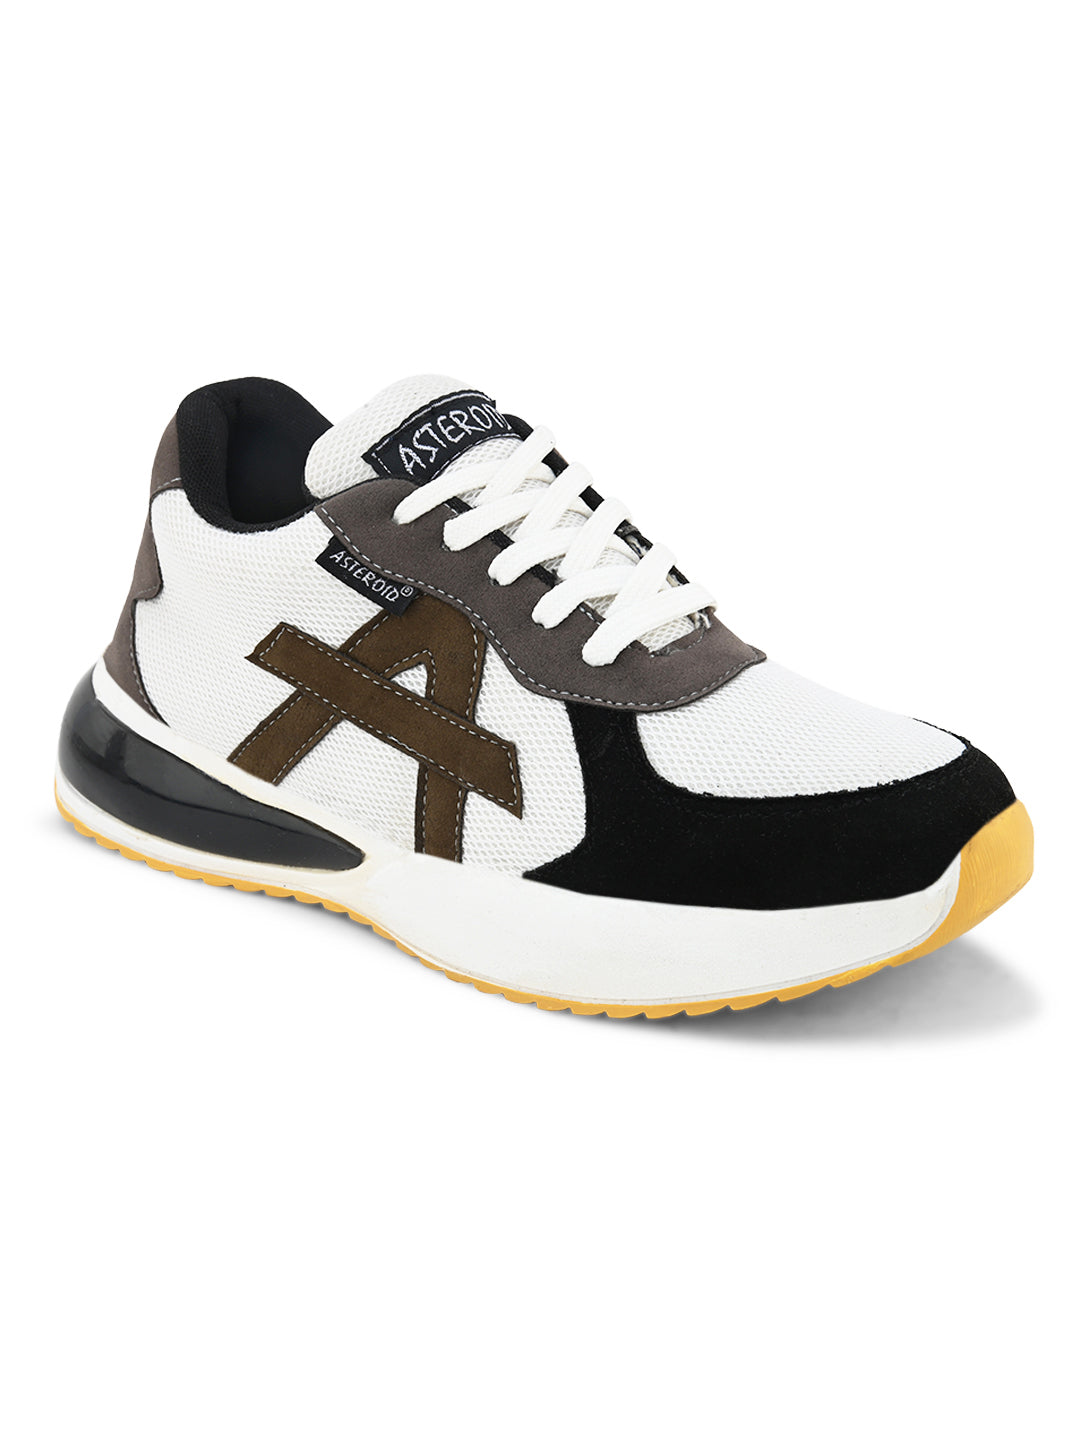 ASTEROID Chunky Men's Casual Sports Sneakers.